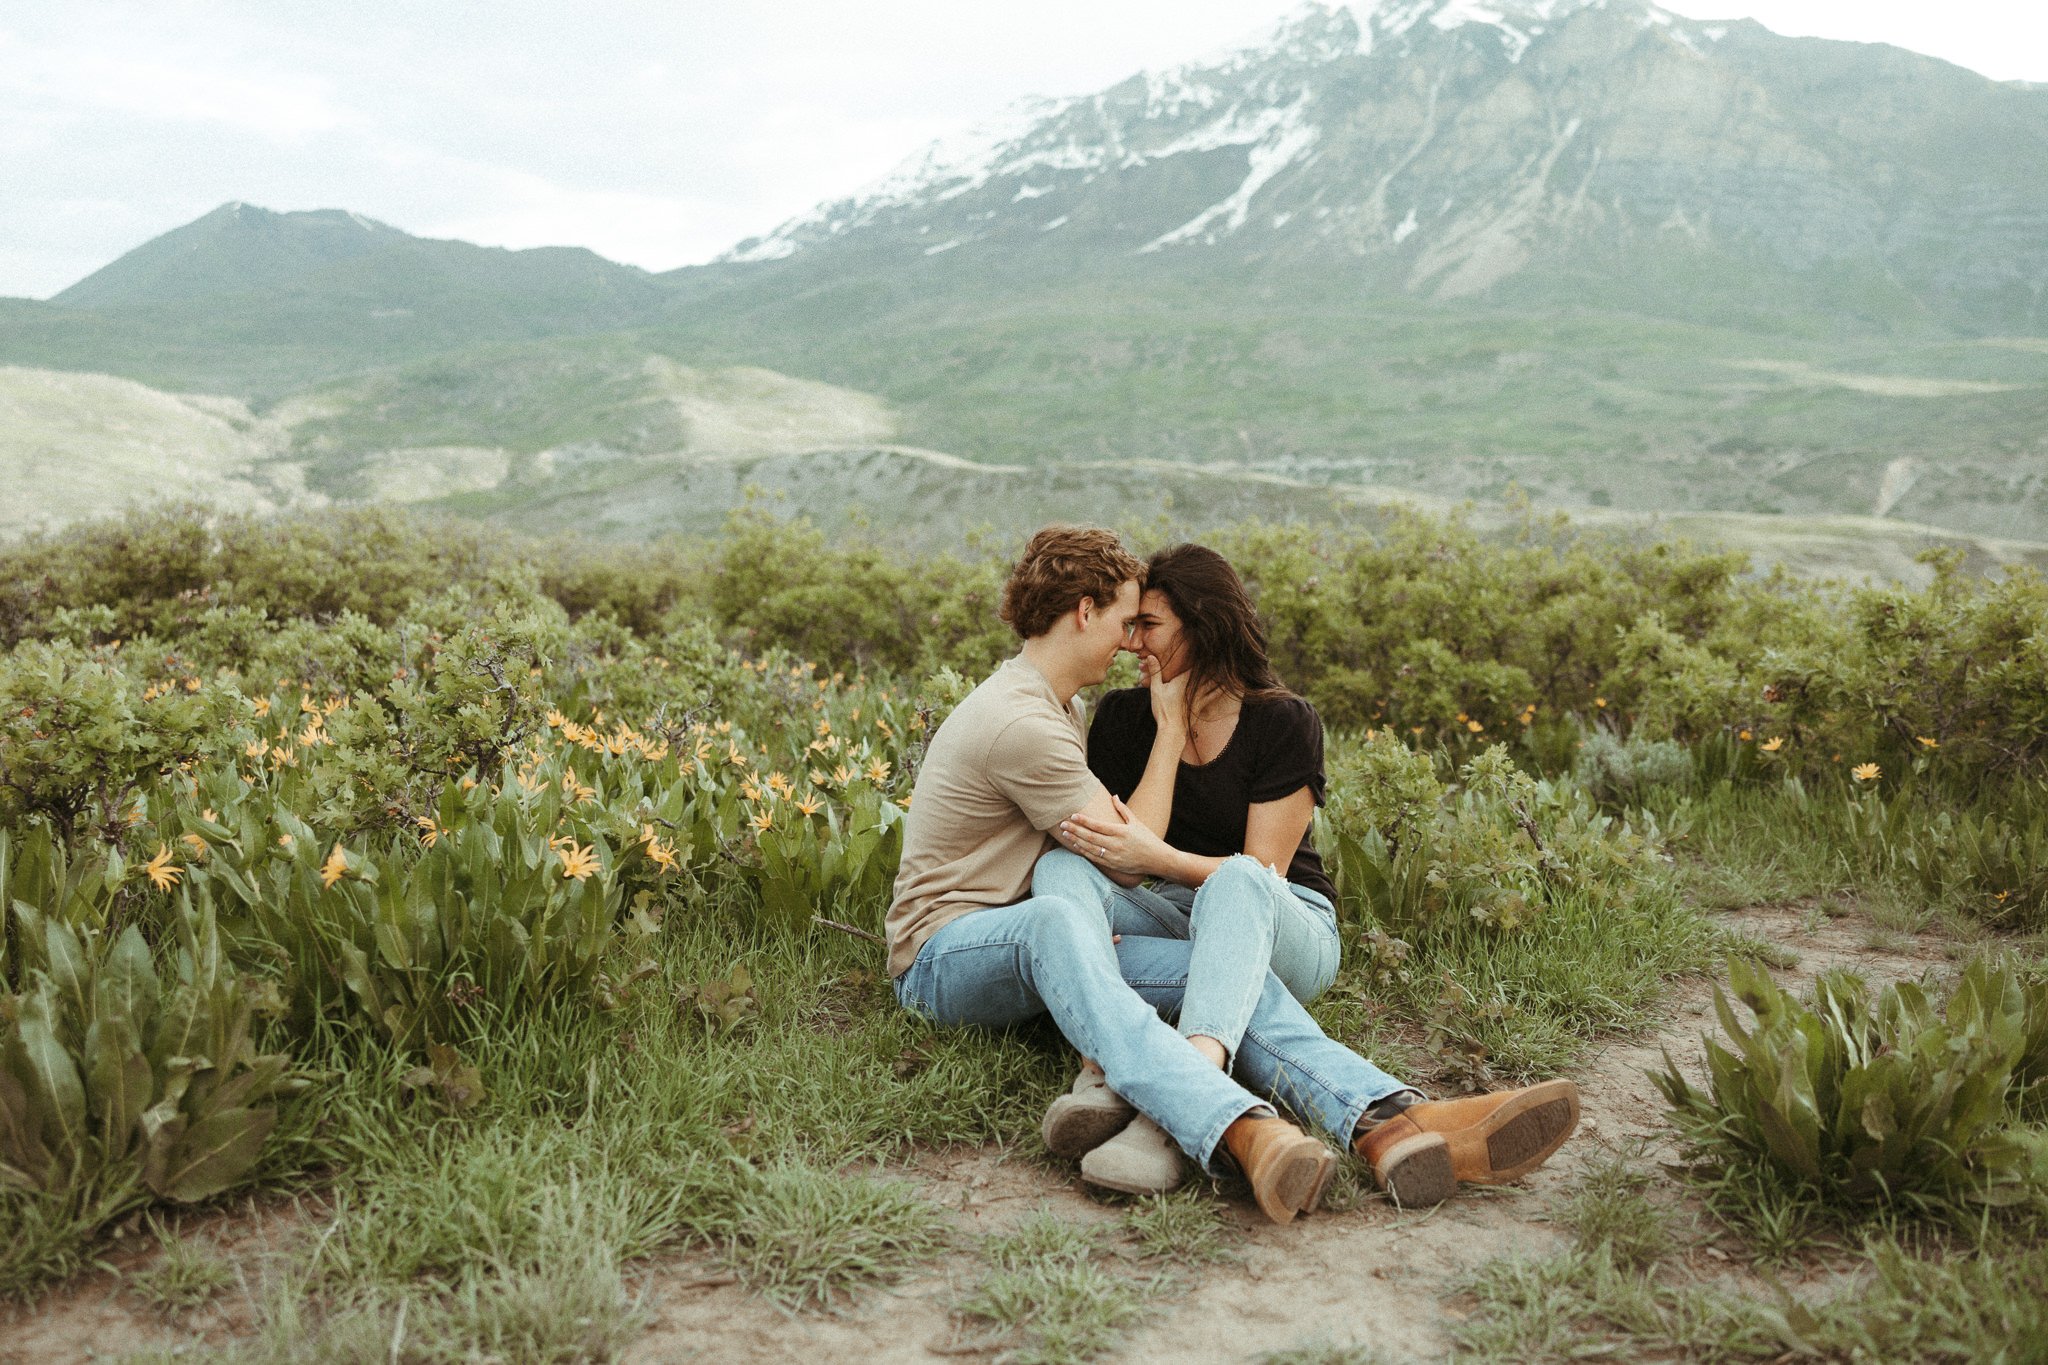 Spring-Provo-Canyon-Wildflowers-Engagement-Session-43